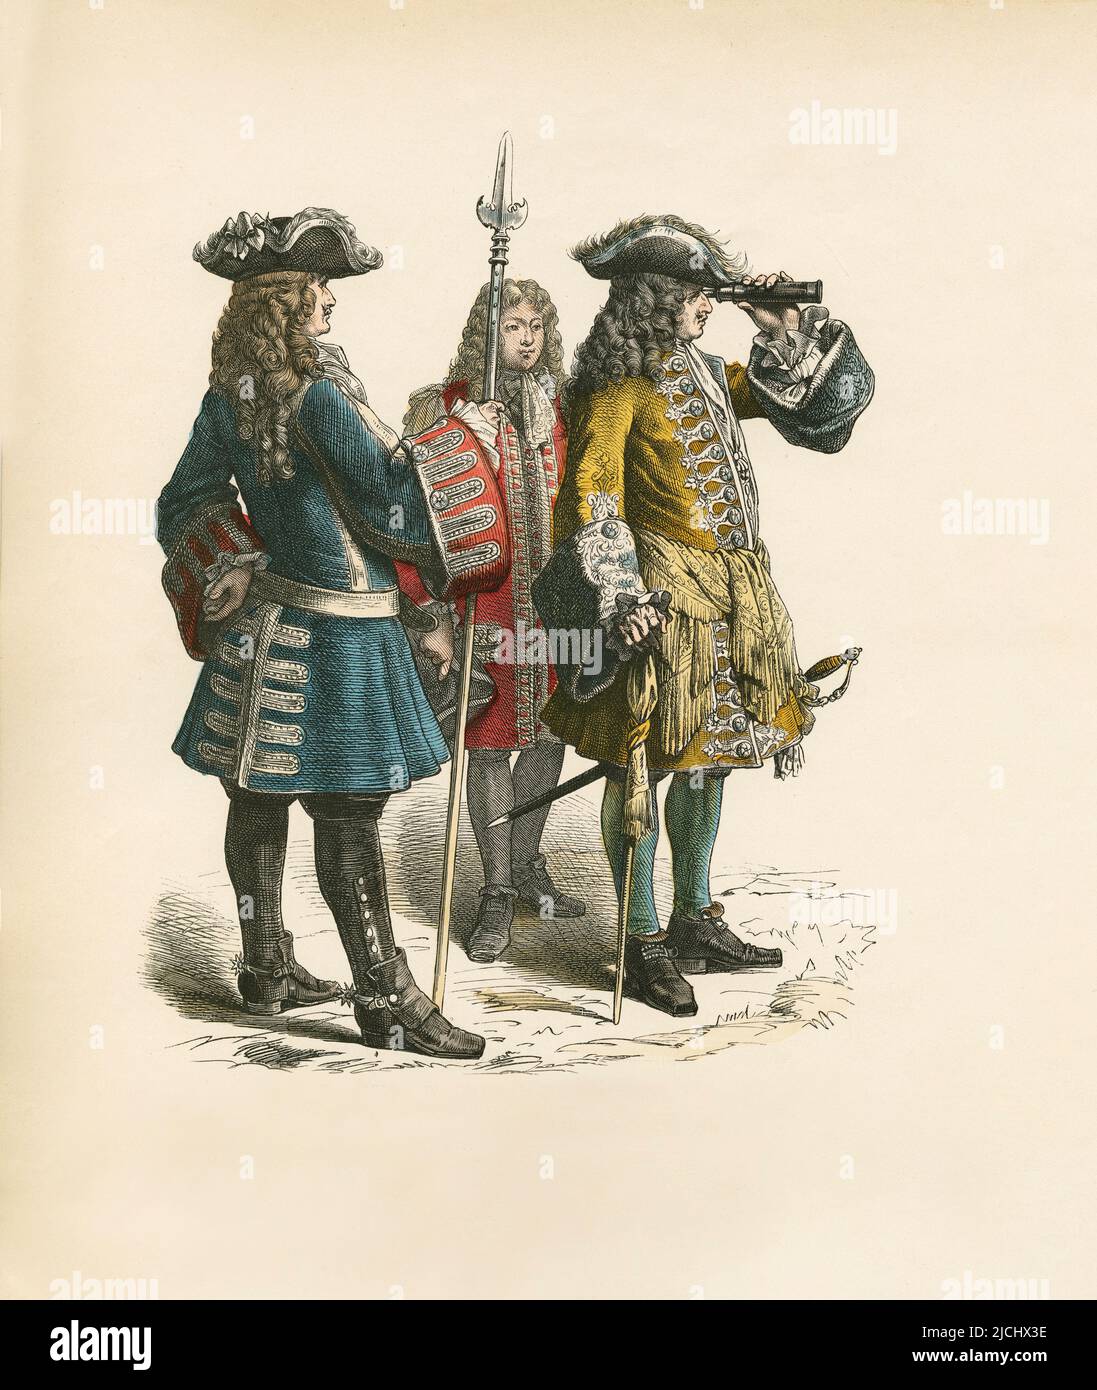 French Marshal and Subaltern Officer, first half of 18th Century, Illustration, The History of Costume, Braun & Schneider, Munich, Germany, 1861-1880 Stock Photo